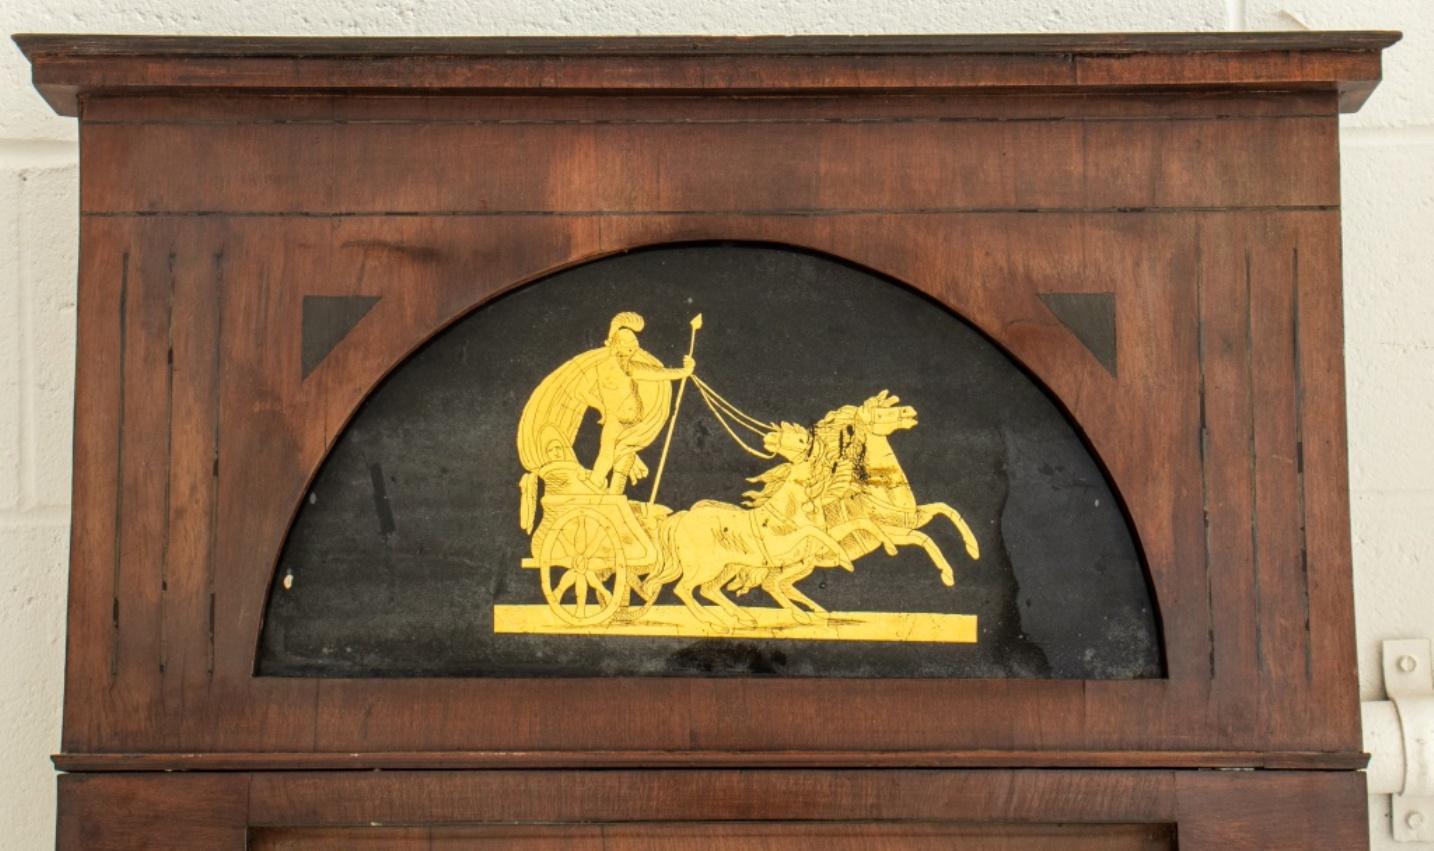 Neoclassical reverse painted glass or verre eglomise mounted mahogany mirror, 19th century, possibly North German, vertical rectangular form with cornice, the reverse painted transom depicting a warrior in his chariot in gold on black ground above a